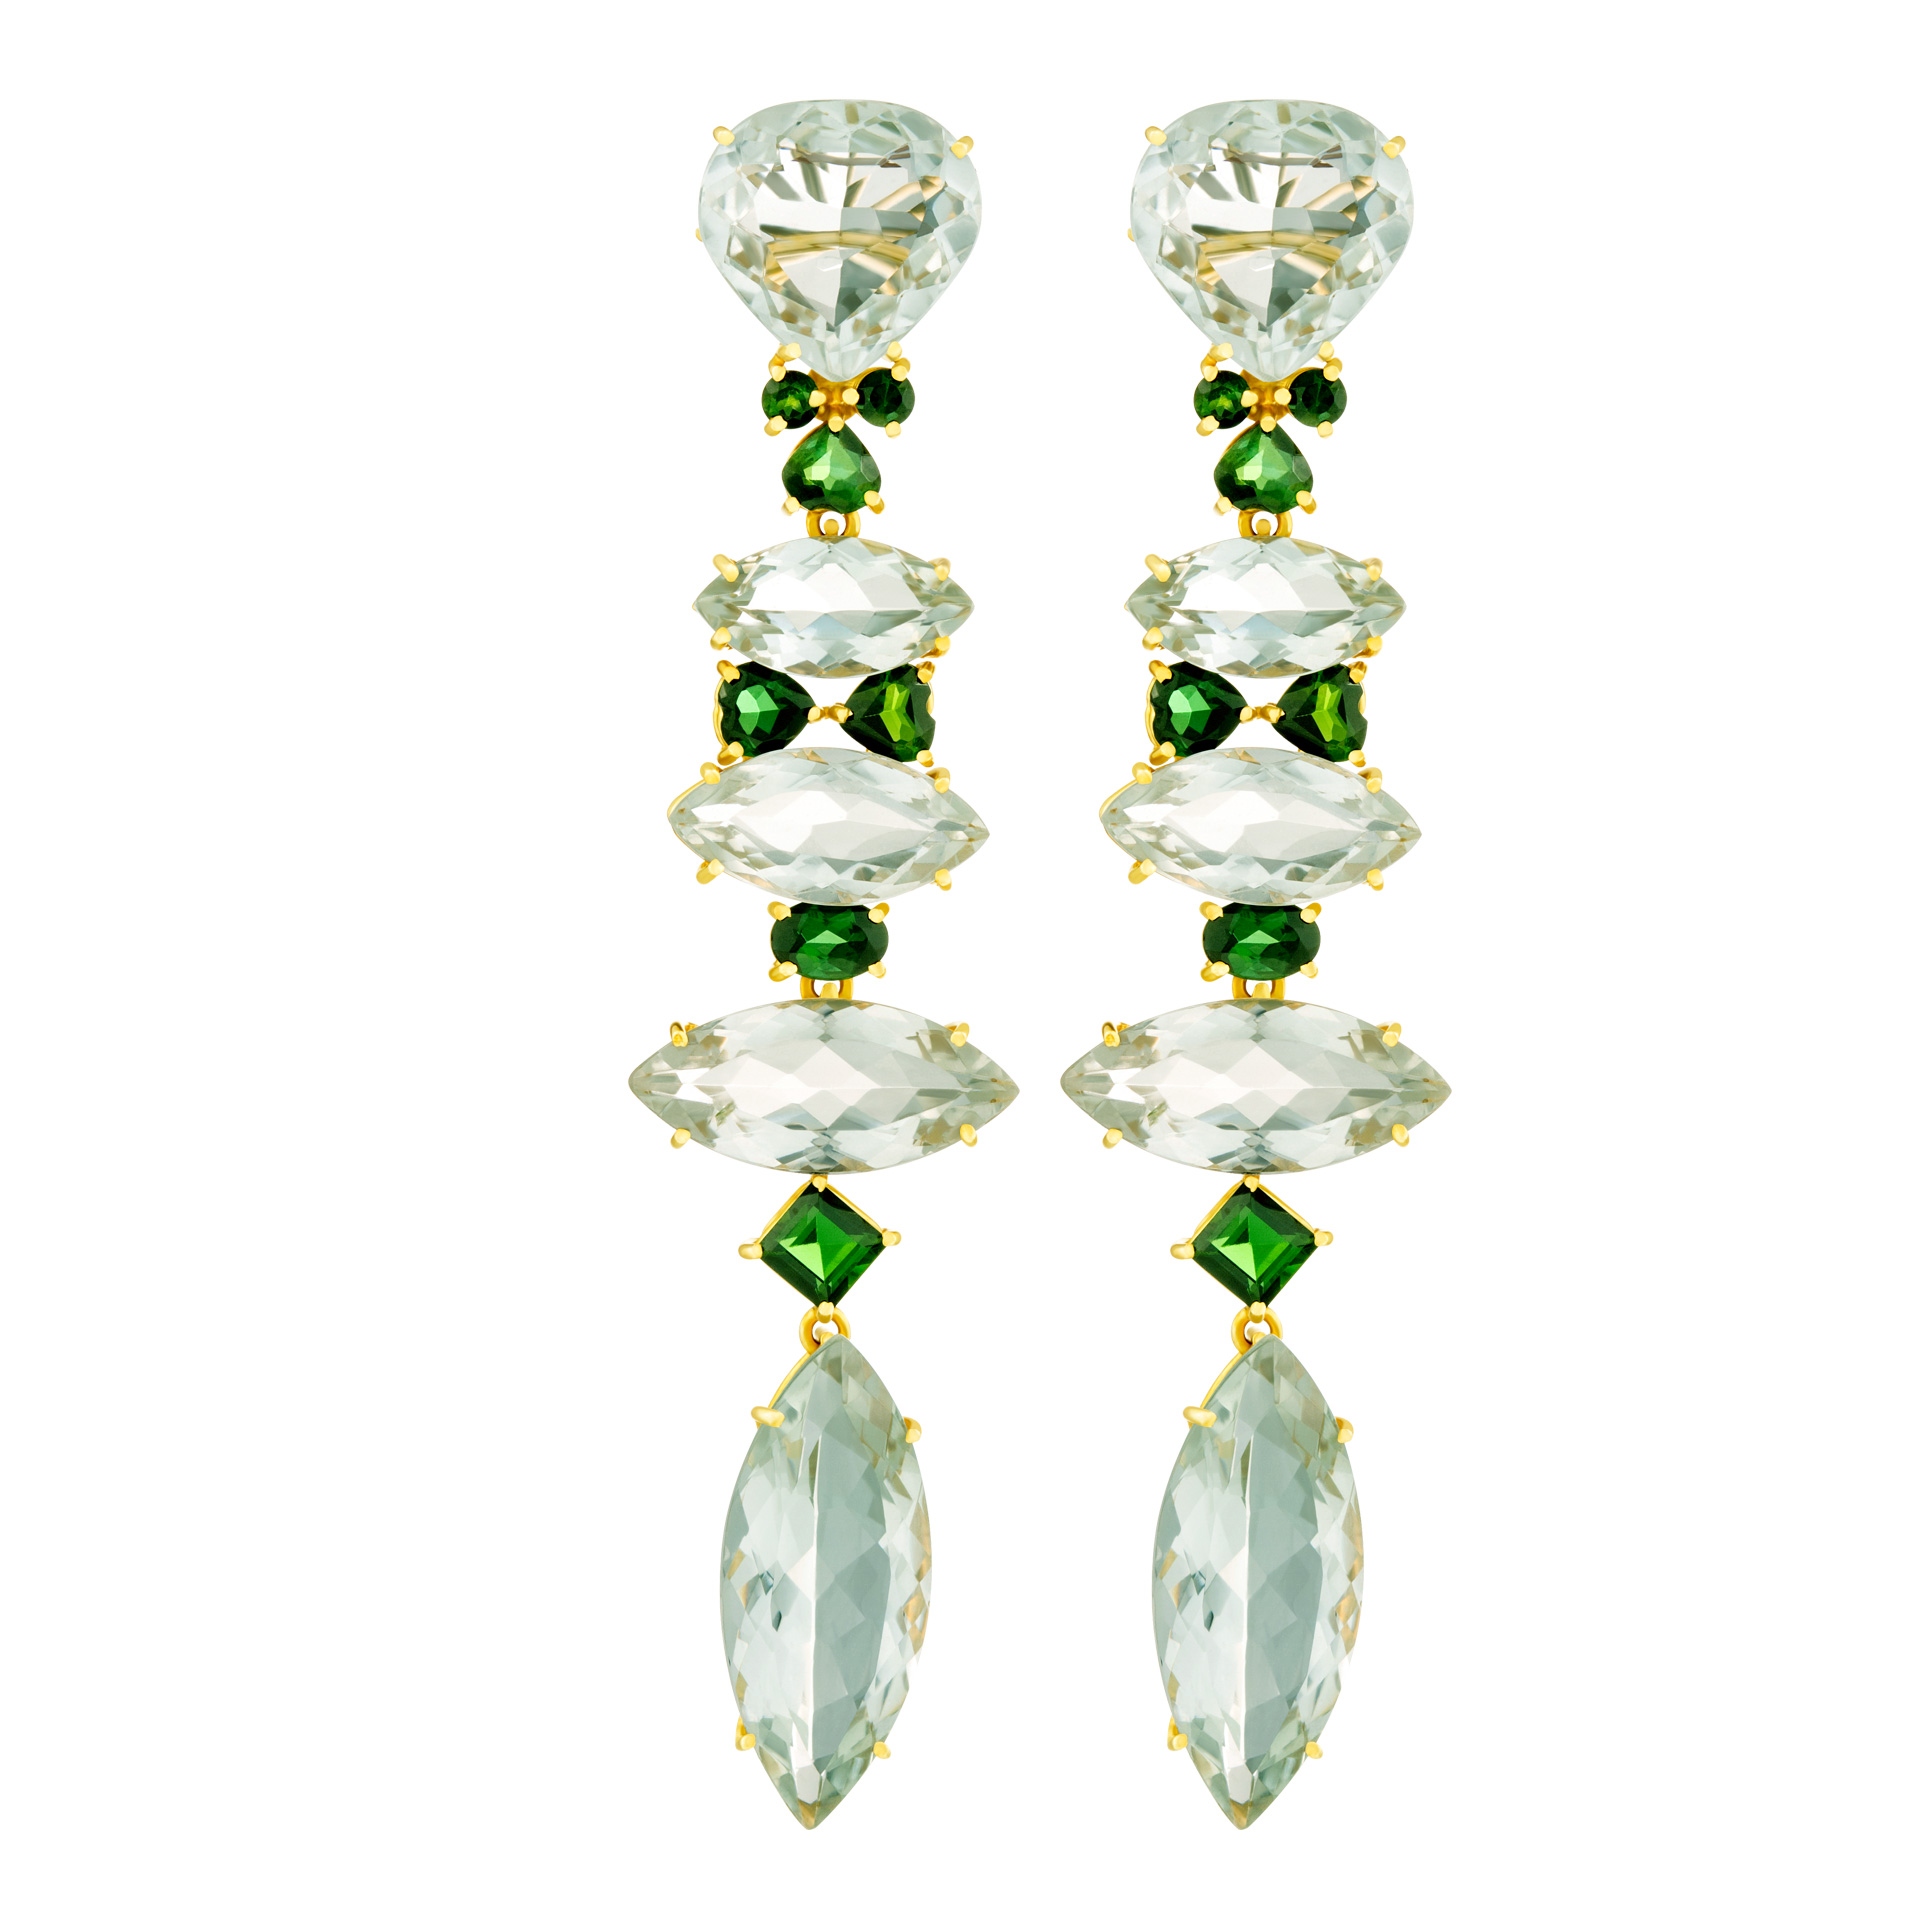  Green tourmaline and topaz earrings in 18k gold. image 1